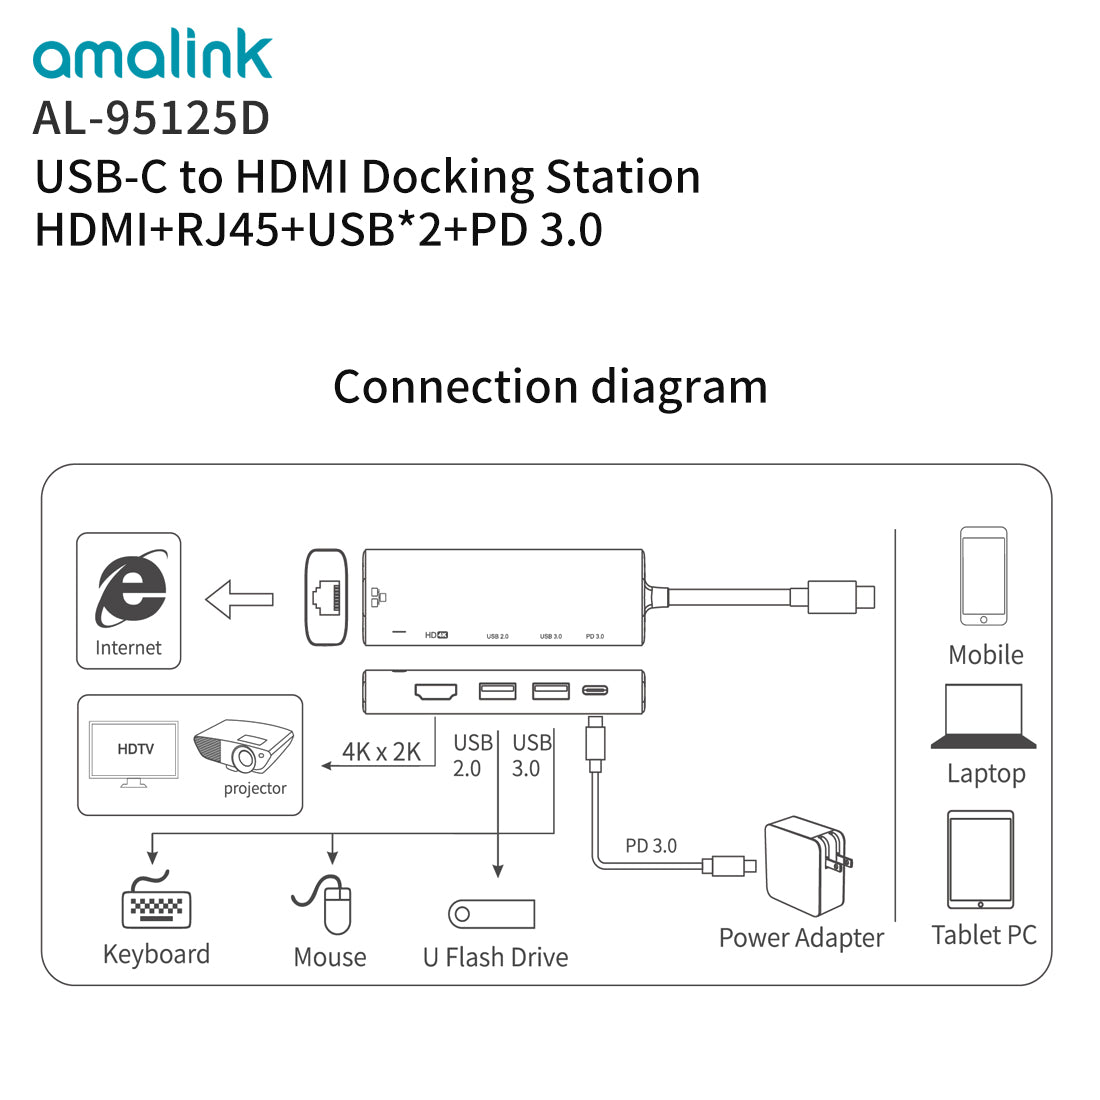 Docking Station USB Type C To HDMI & RJ45 Compatible Adapter With Multi USB Ports (95125D) PD 3.0 For Laptop